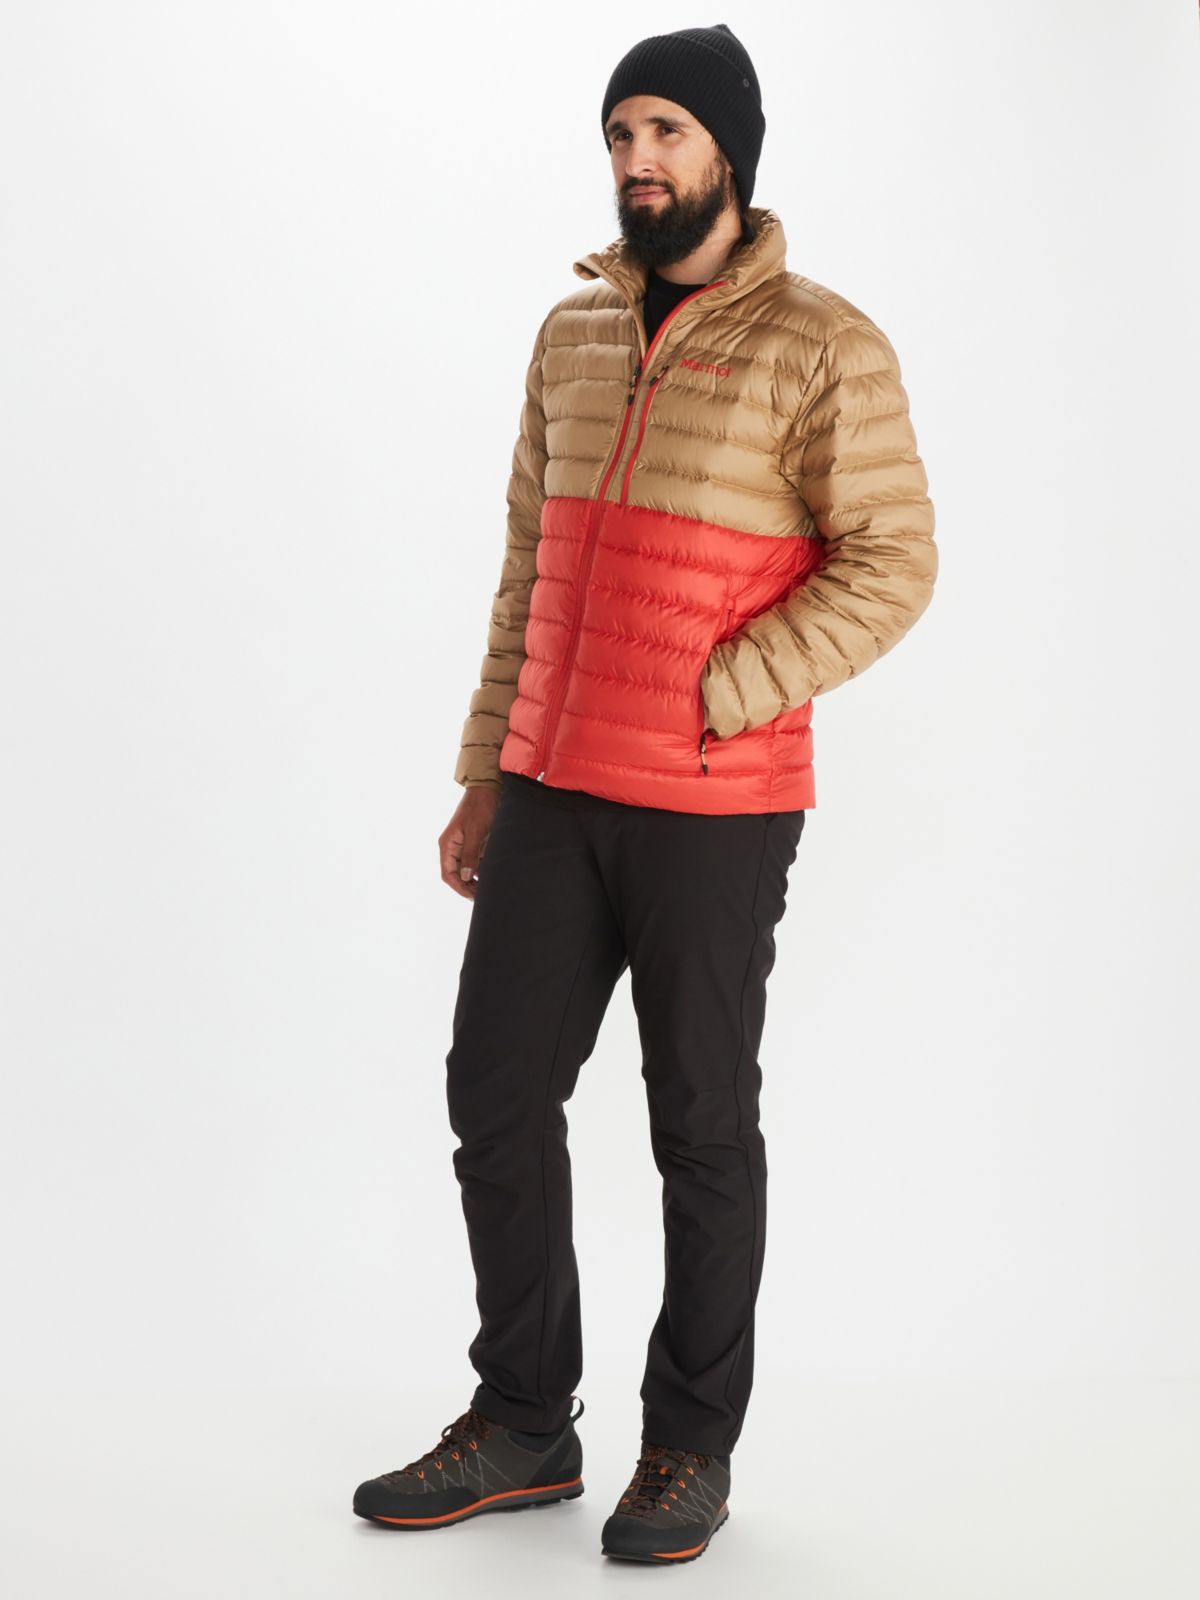 model wearing red and tan mens puffer jacket